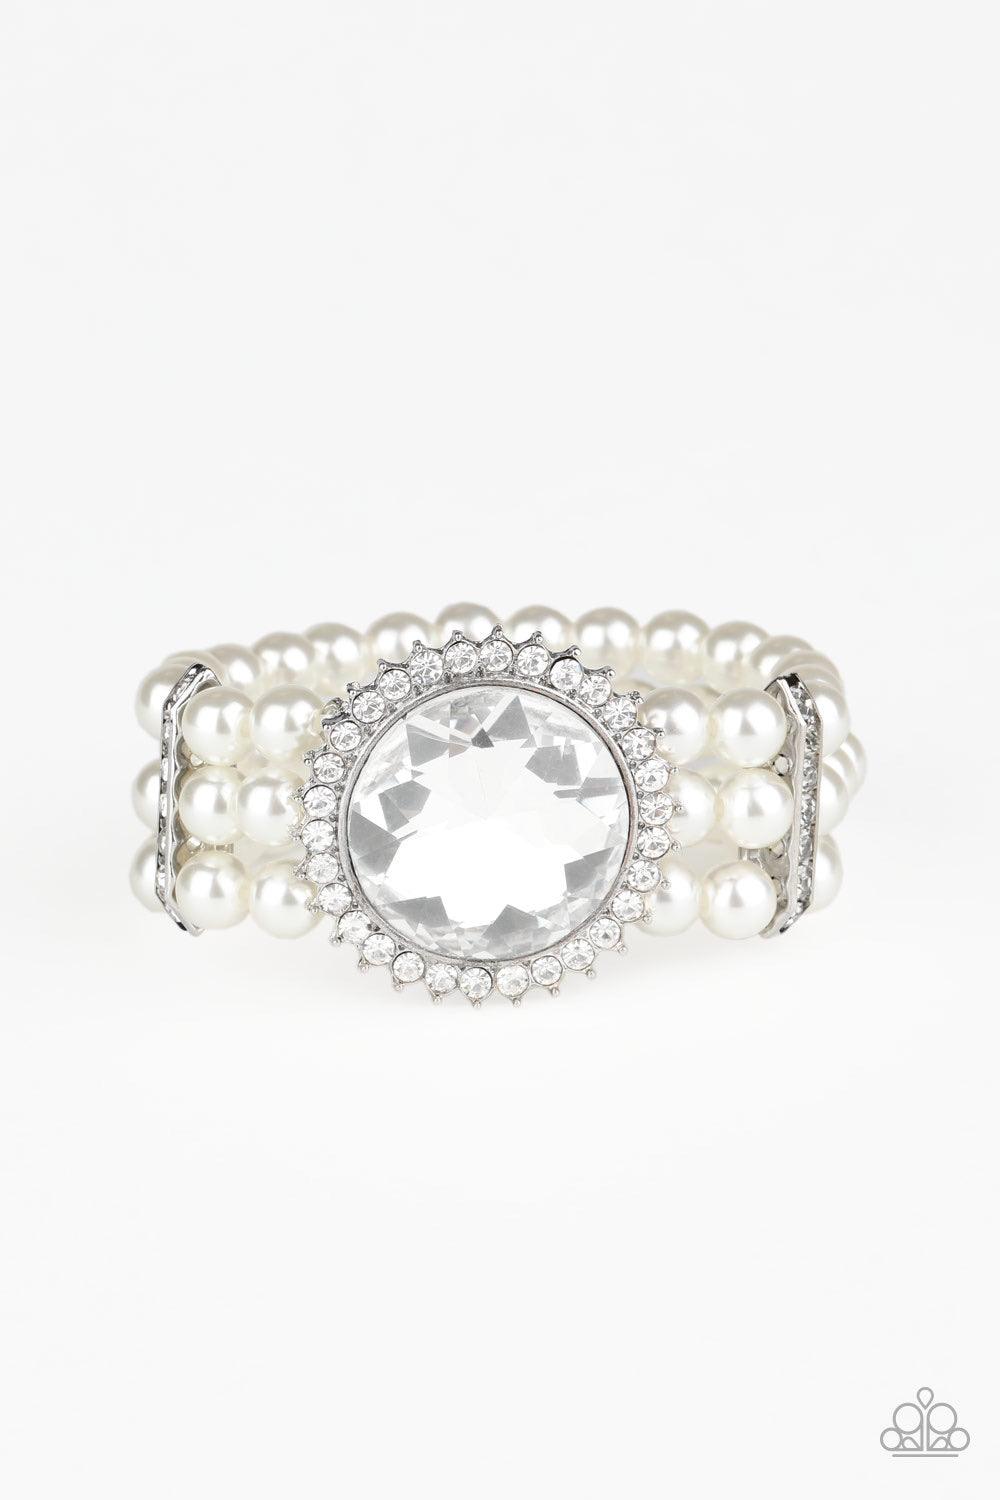 Paparazzi Accessories Speechless Sparkle - White Threaded along stretchy bands, strands of pearly white beads are held in place with white rhinestone encrusted fittings around the wrist. Bedazzled in a ring of glassy white rhinestones, a dramatically over